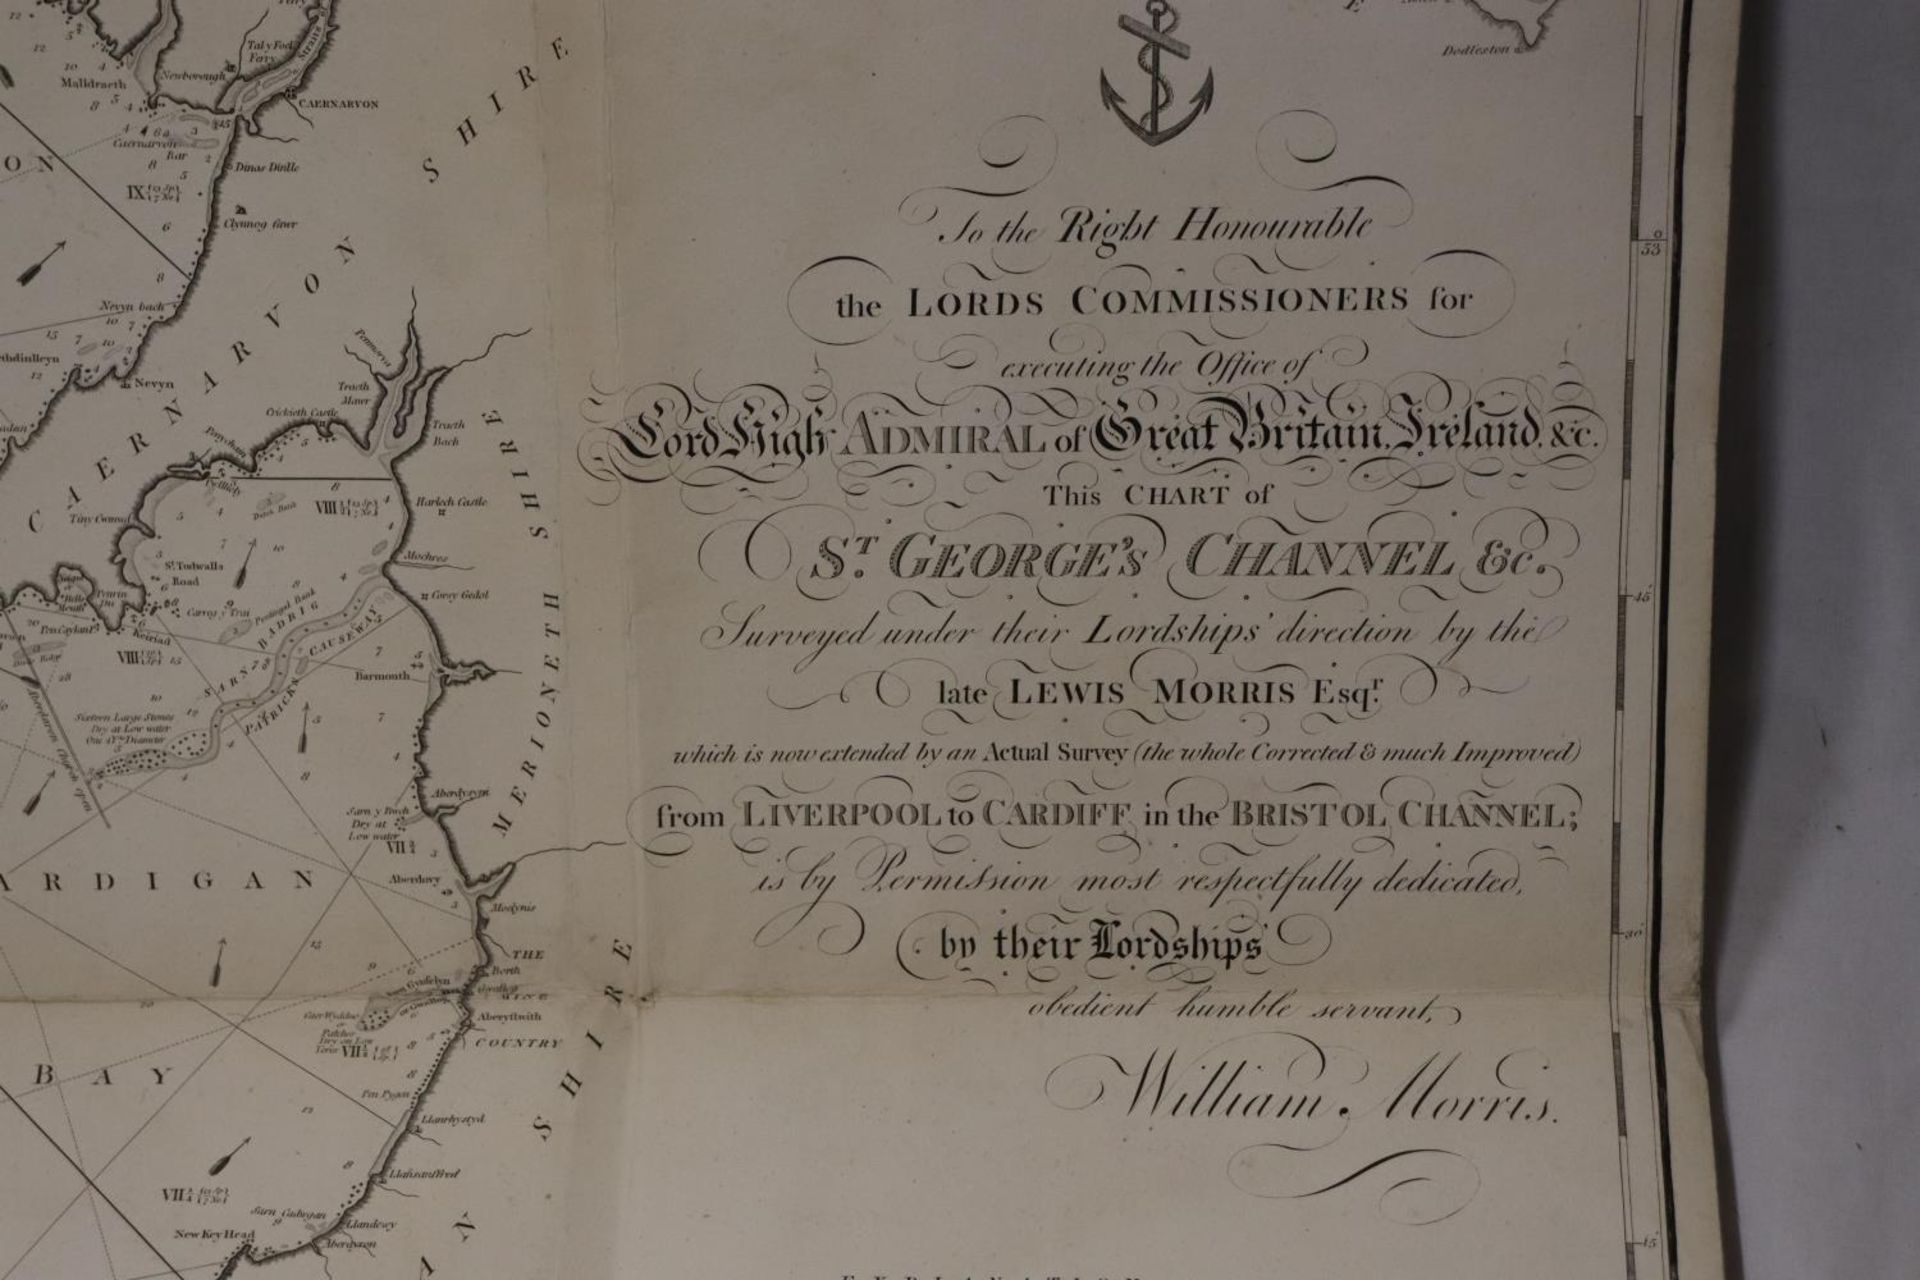 MORRIS (LEWIS) FOLD OUT MAP OF ST.GEORGES CHANNEL PUBLISHED 25TH NOVEMBER 1800 BY WILLIAM MORRIS, 92 - Bild 5 aus 7